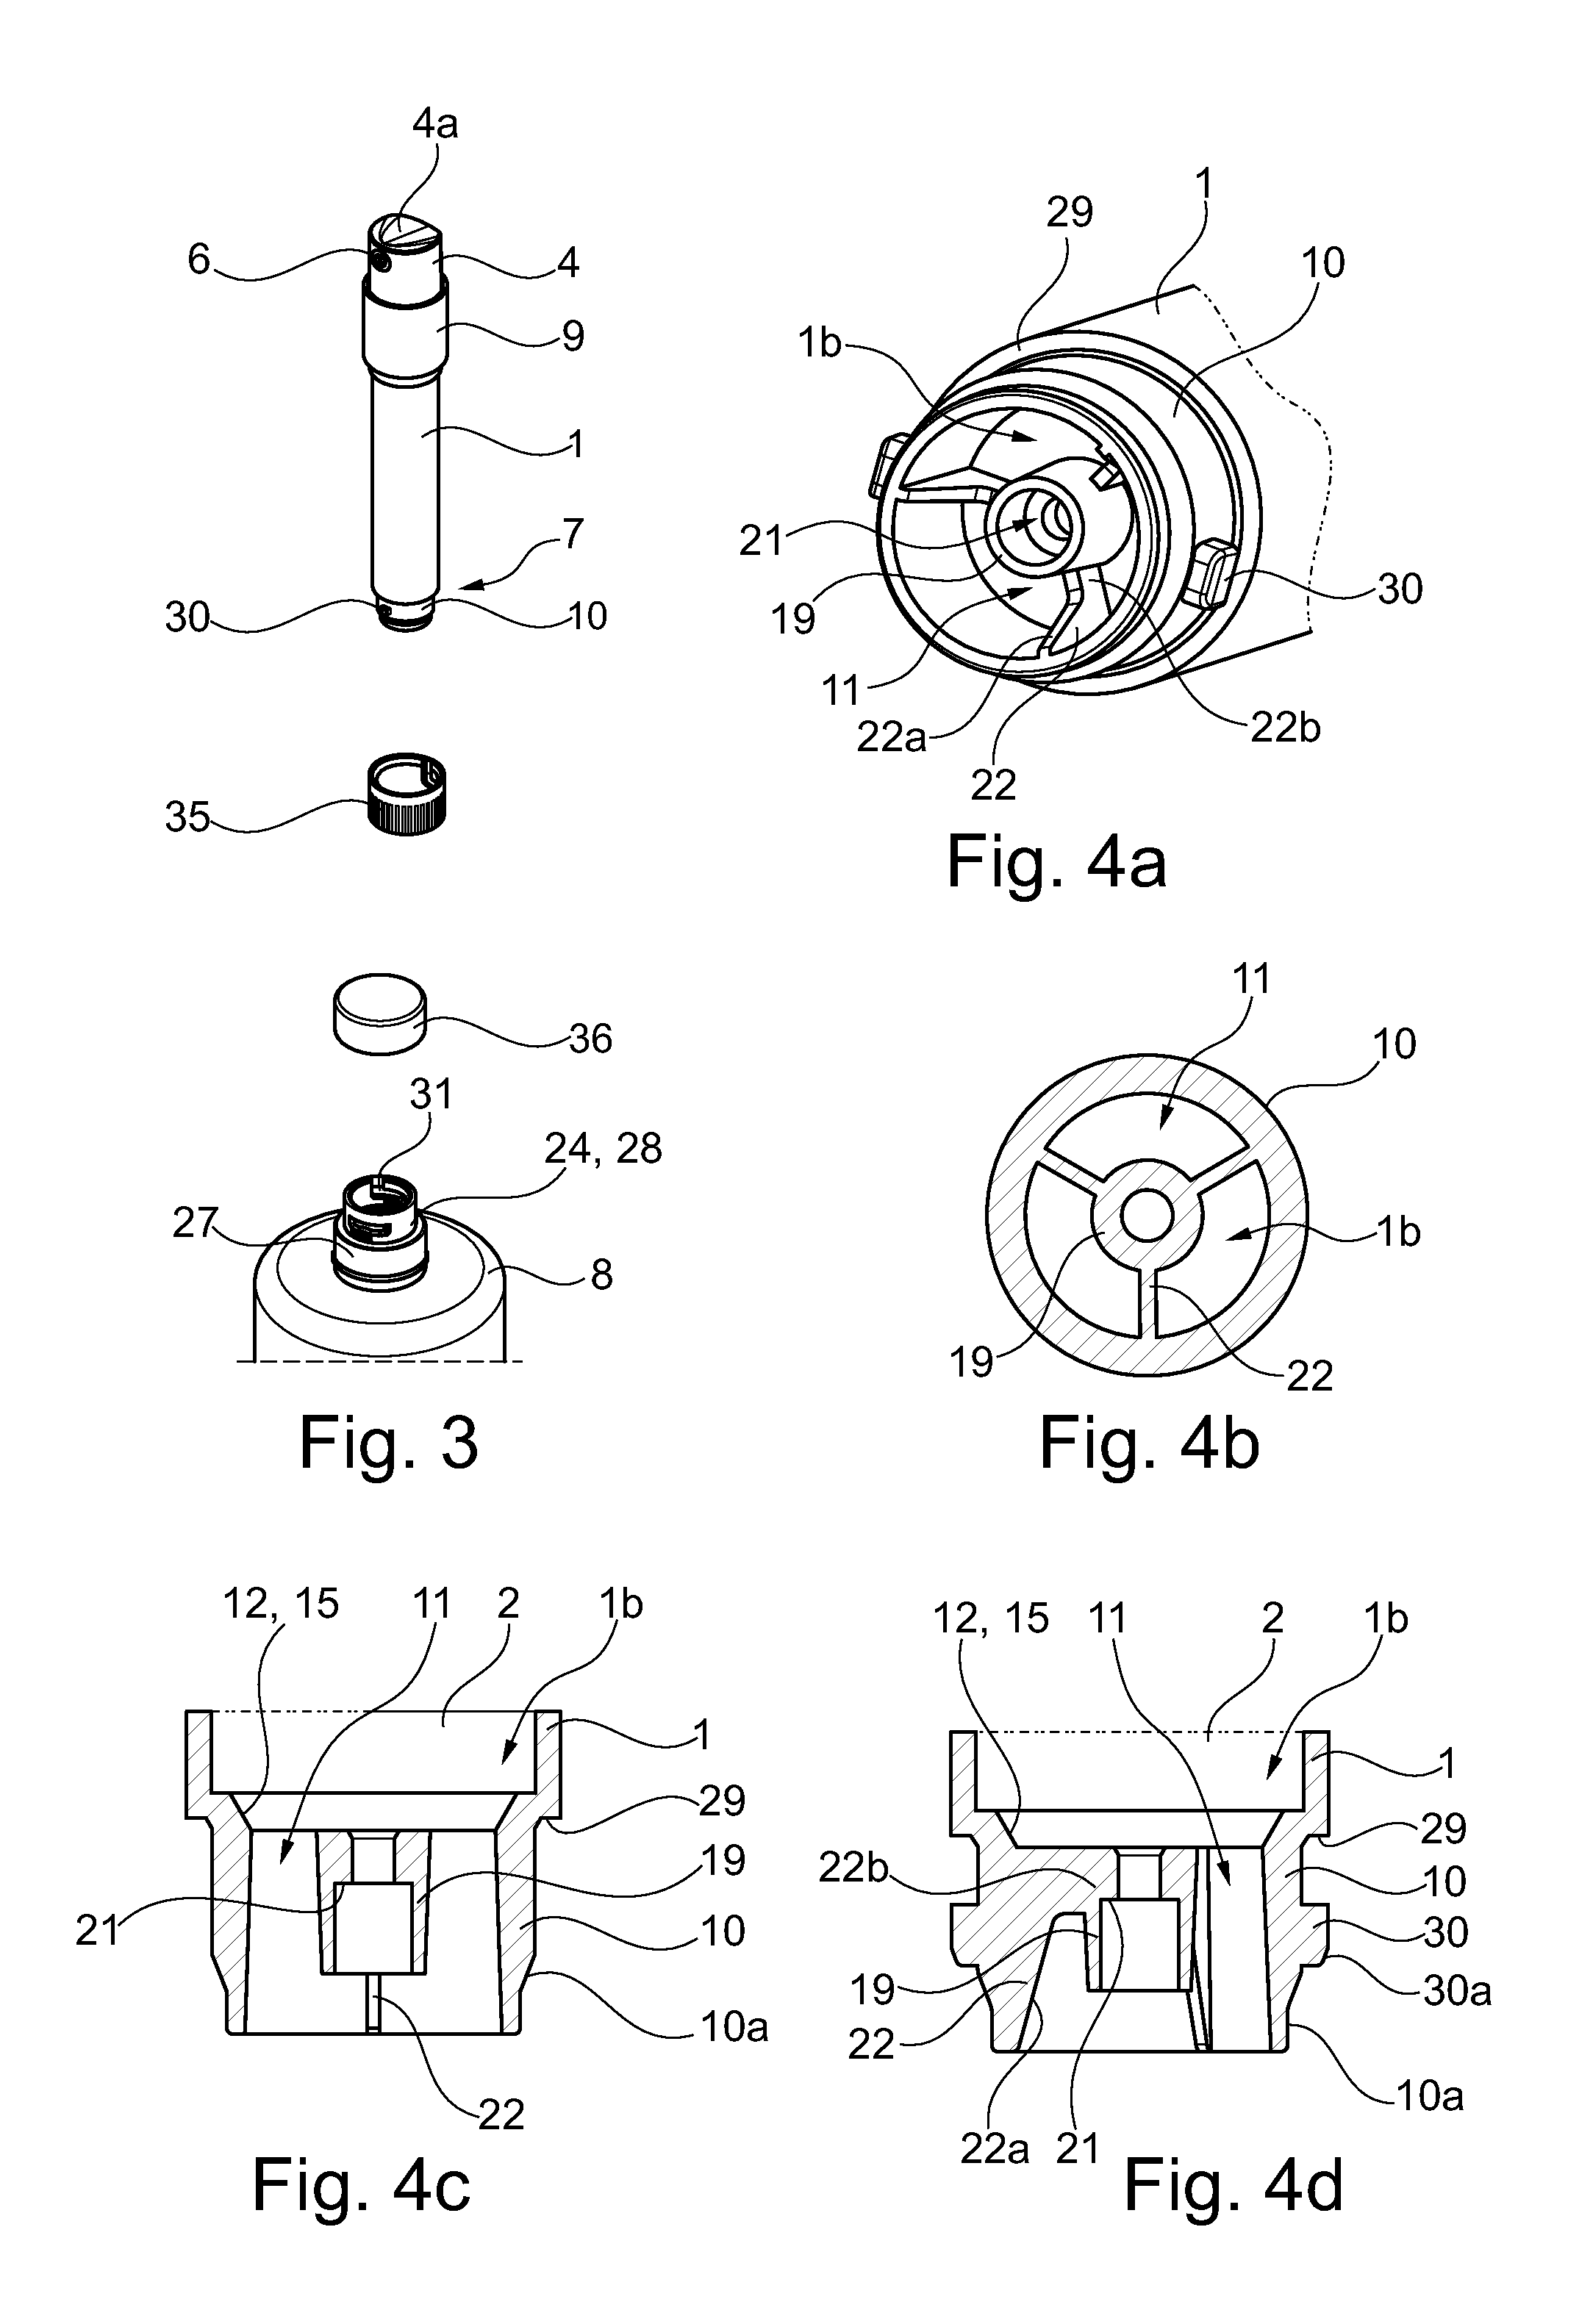 Refillable Bottle For Dispensing A Fluid Product